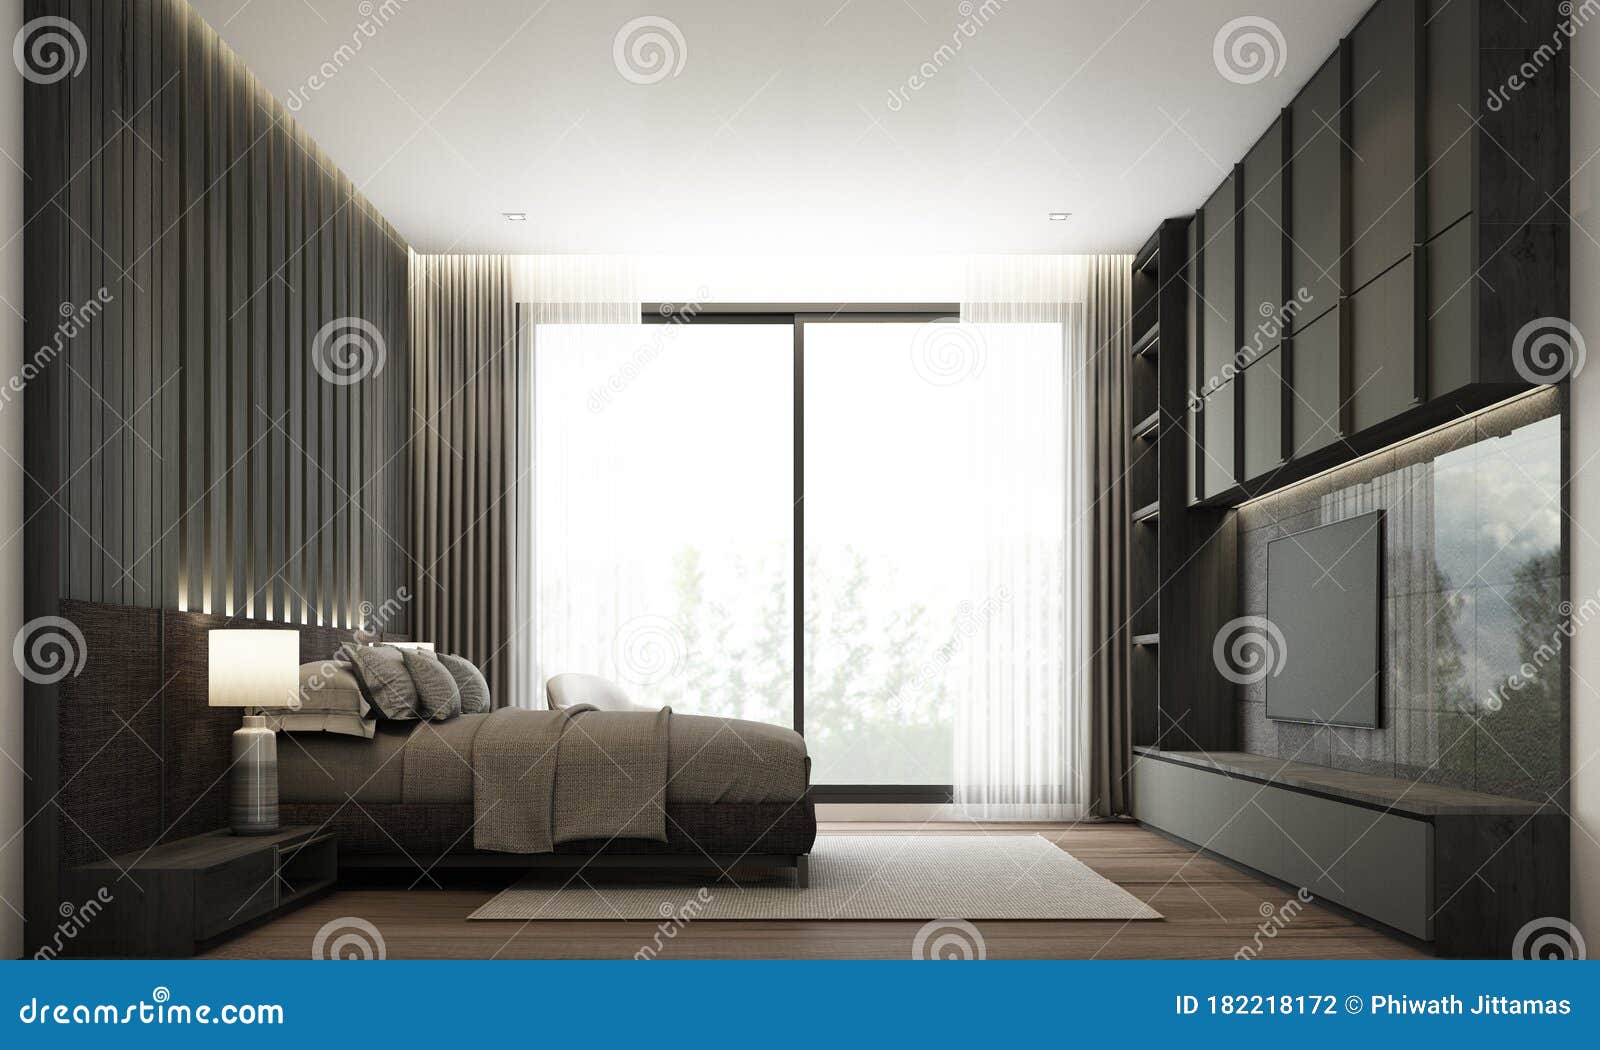 Bedroom Modern Minimal Style With Built In Headboard And Tv Cabinet Stock Illustration Illustration Of Window Bedside 182218172,Roasted Whole Chicken Recipe Ideas